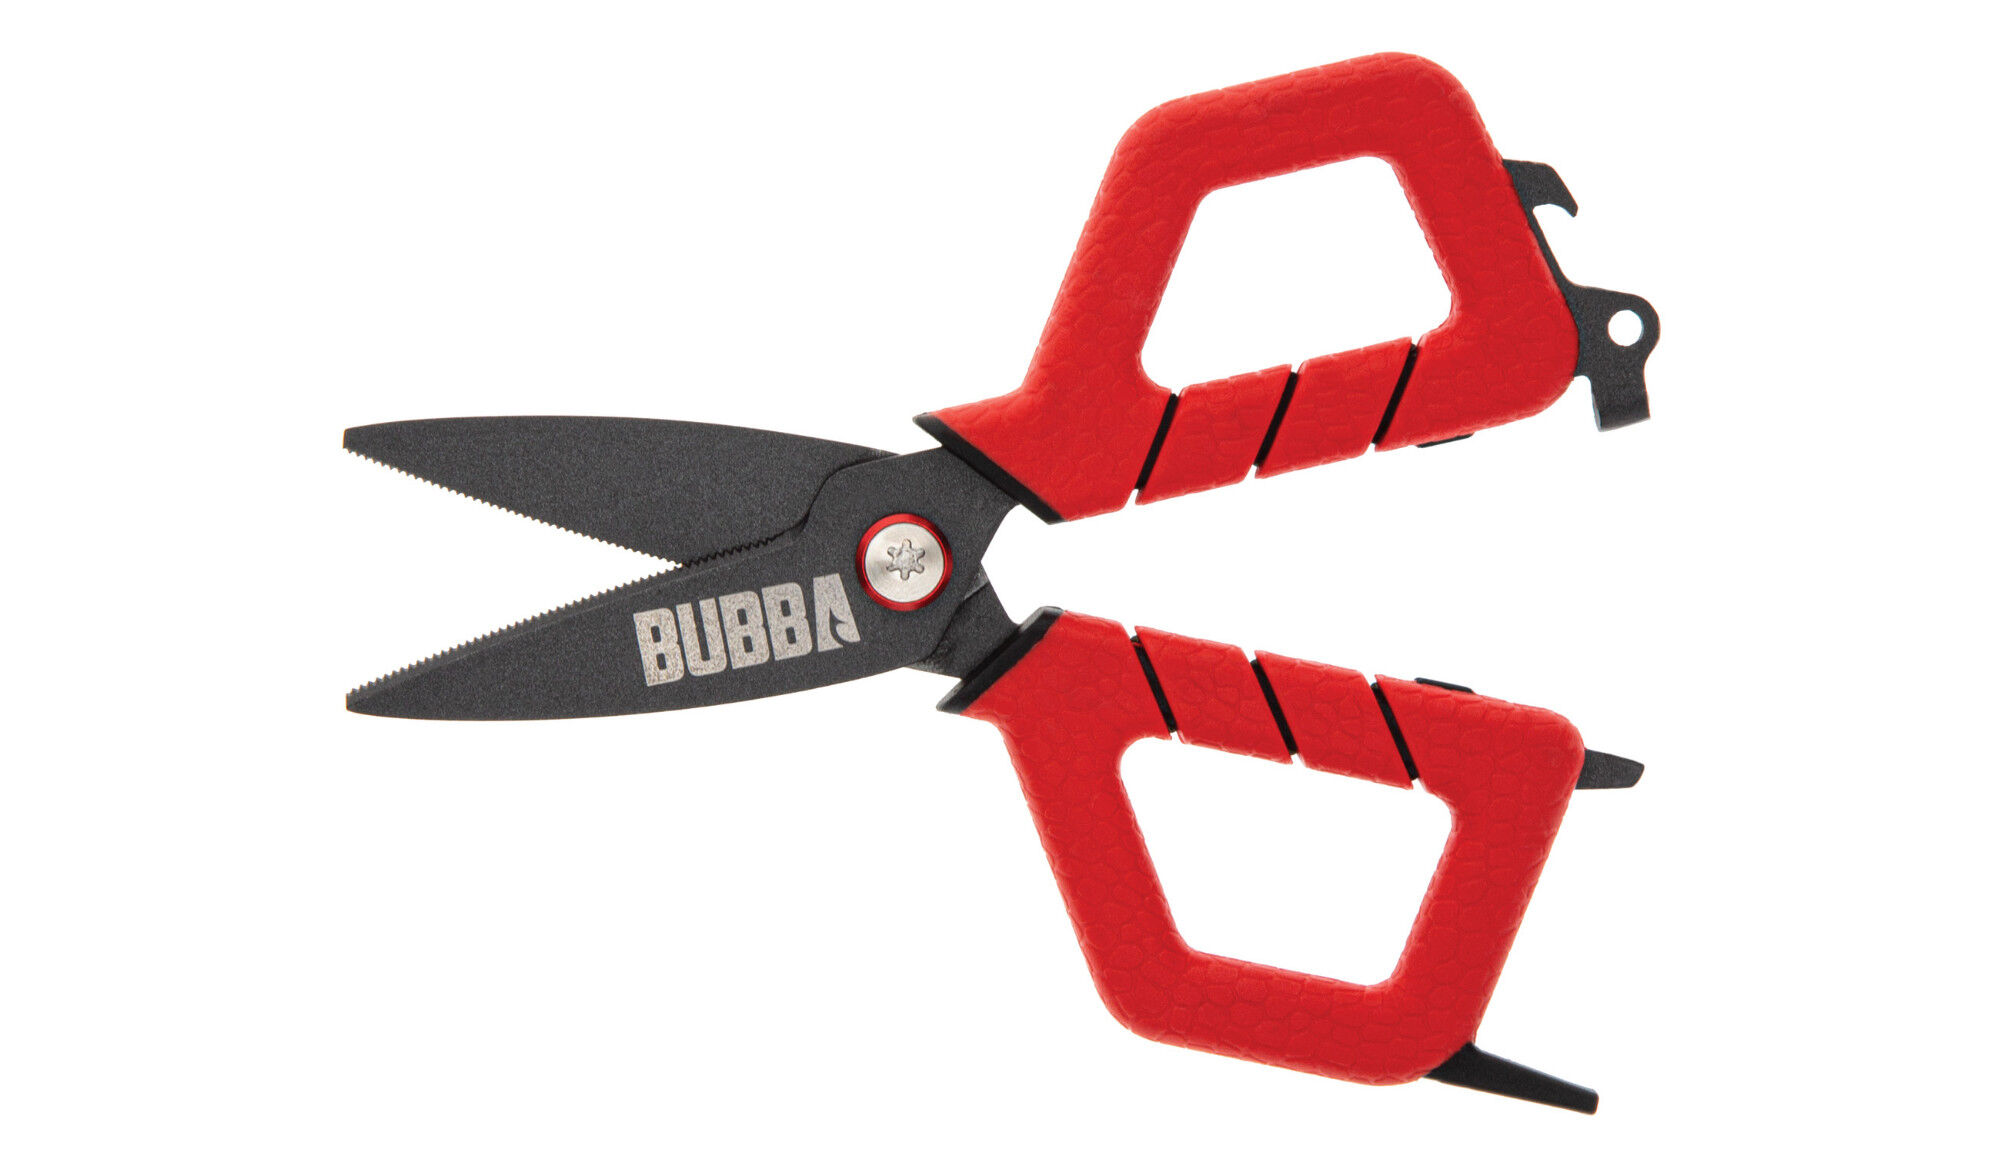 These BUBBA shears help me tie better knots. 